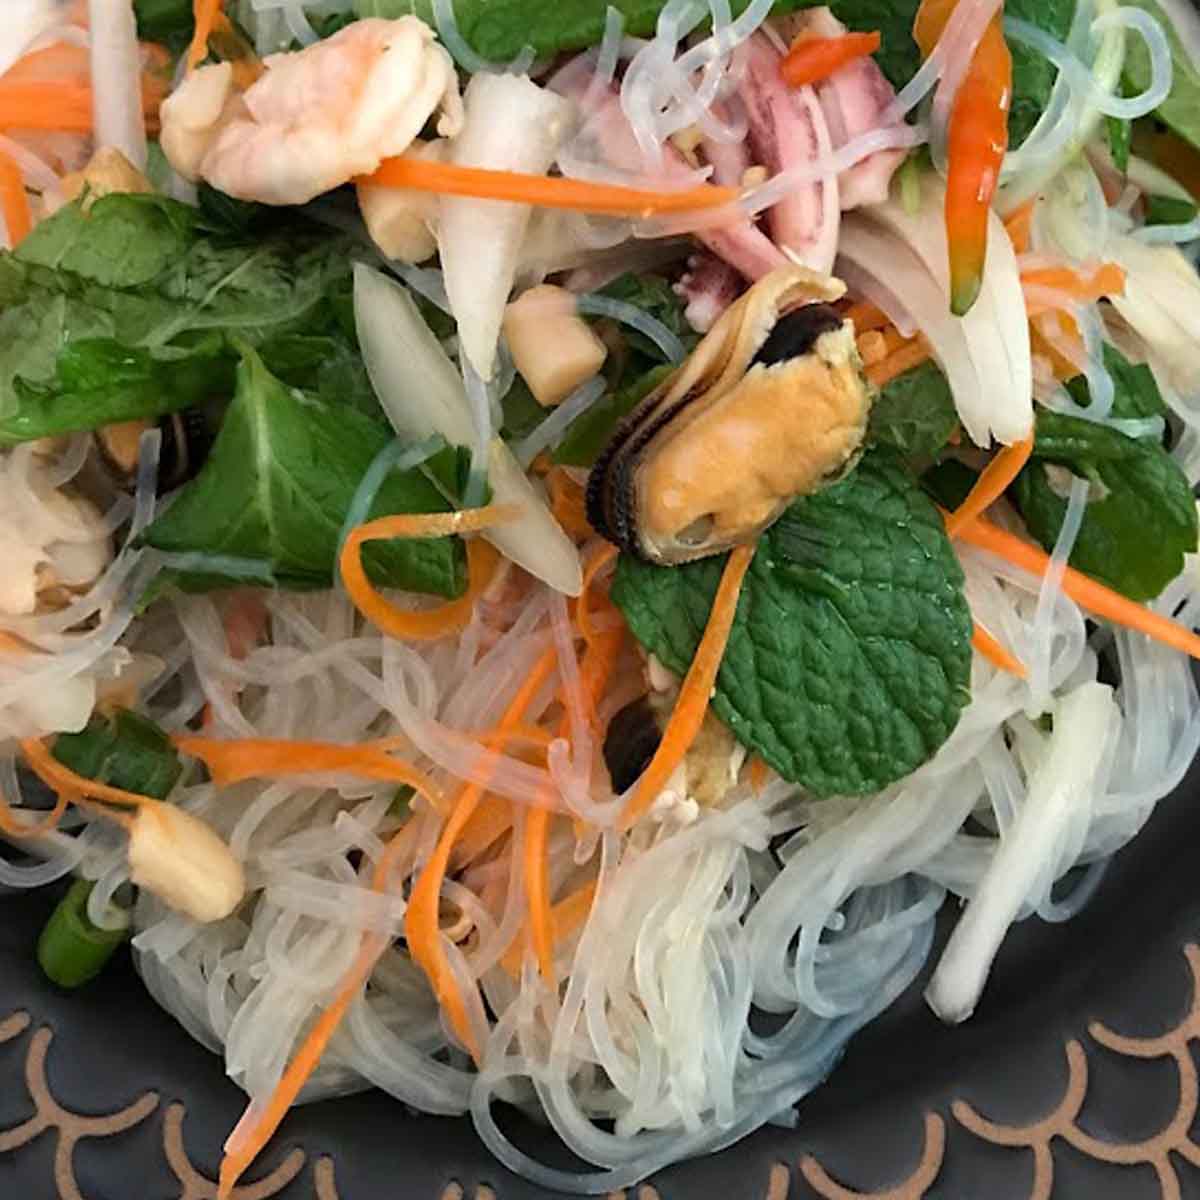 Glass Noodles Seafood Salad is an easy, healthy Thai salad that you can modify to meet your specific tastes and needs.